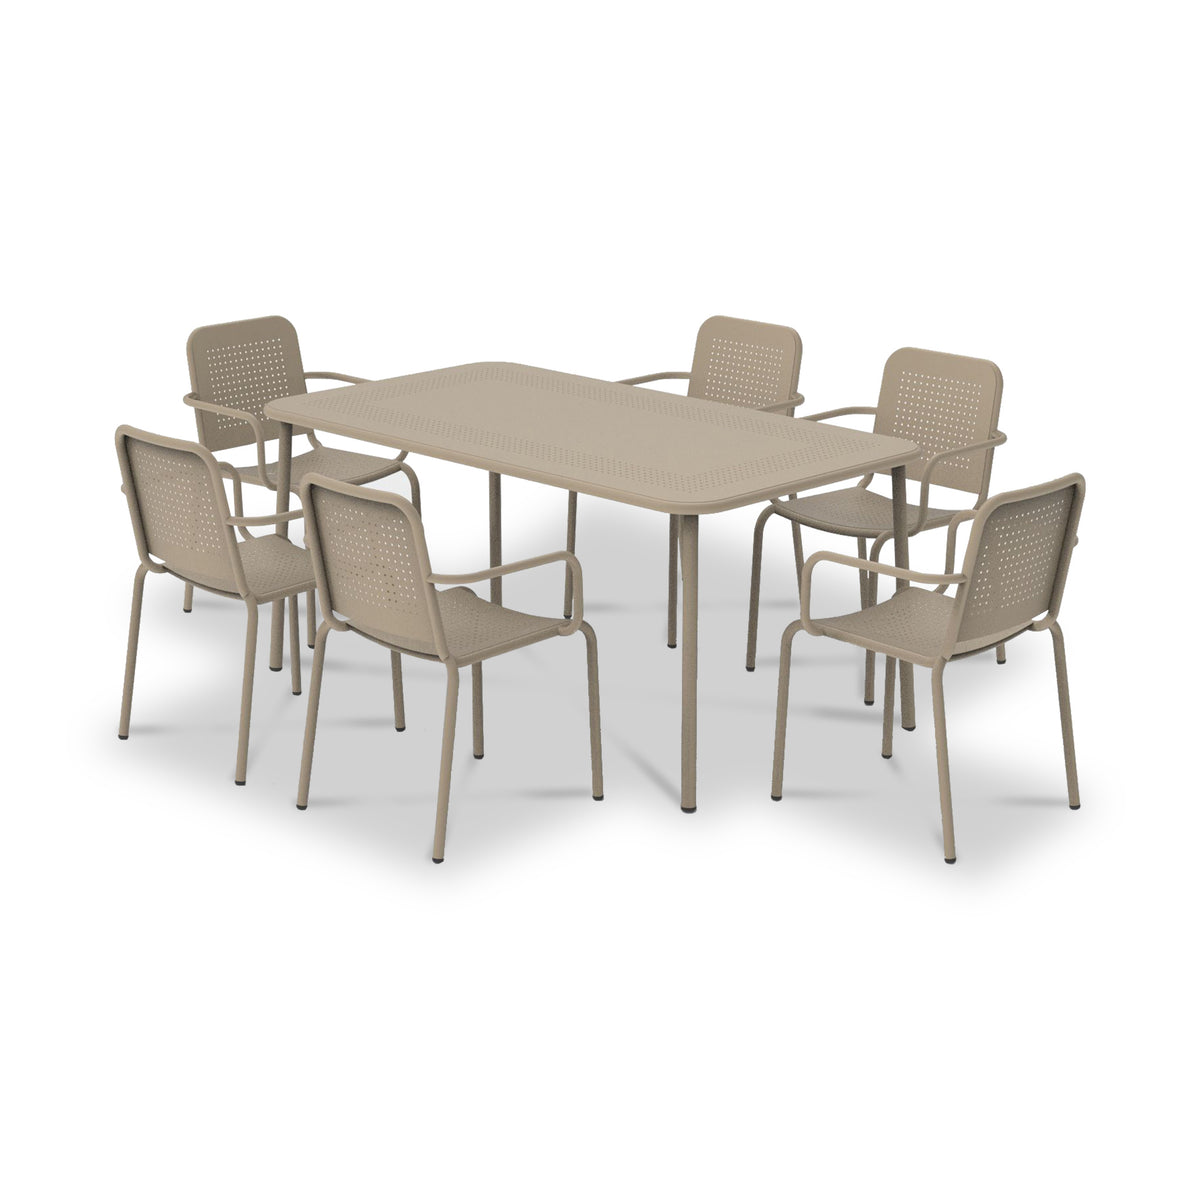 Porto Champagne 6 Seater Round Dining Set from Roseland Furniture